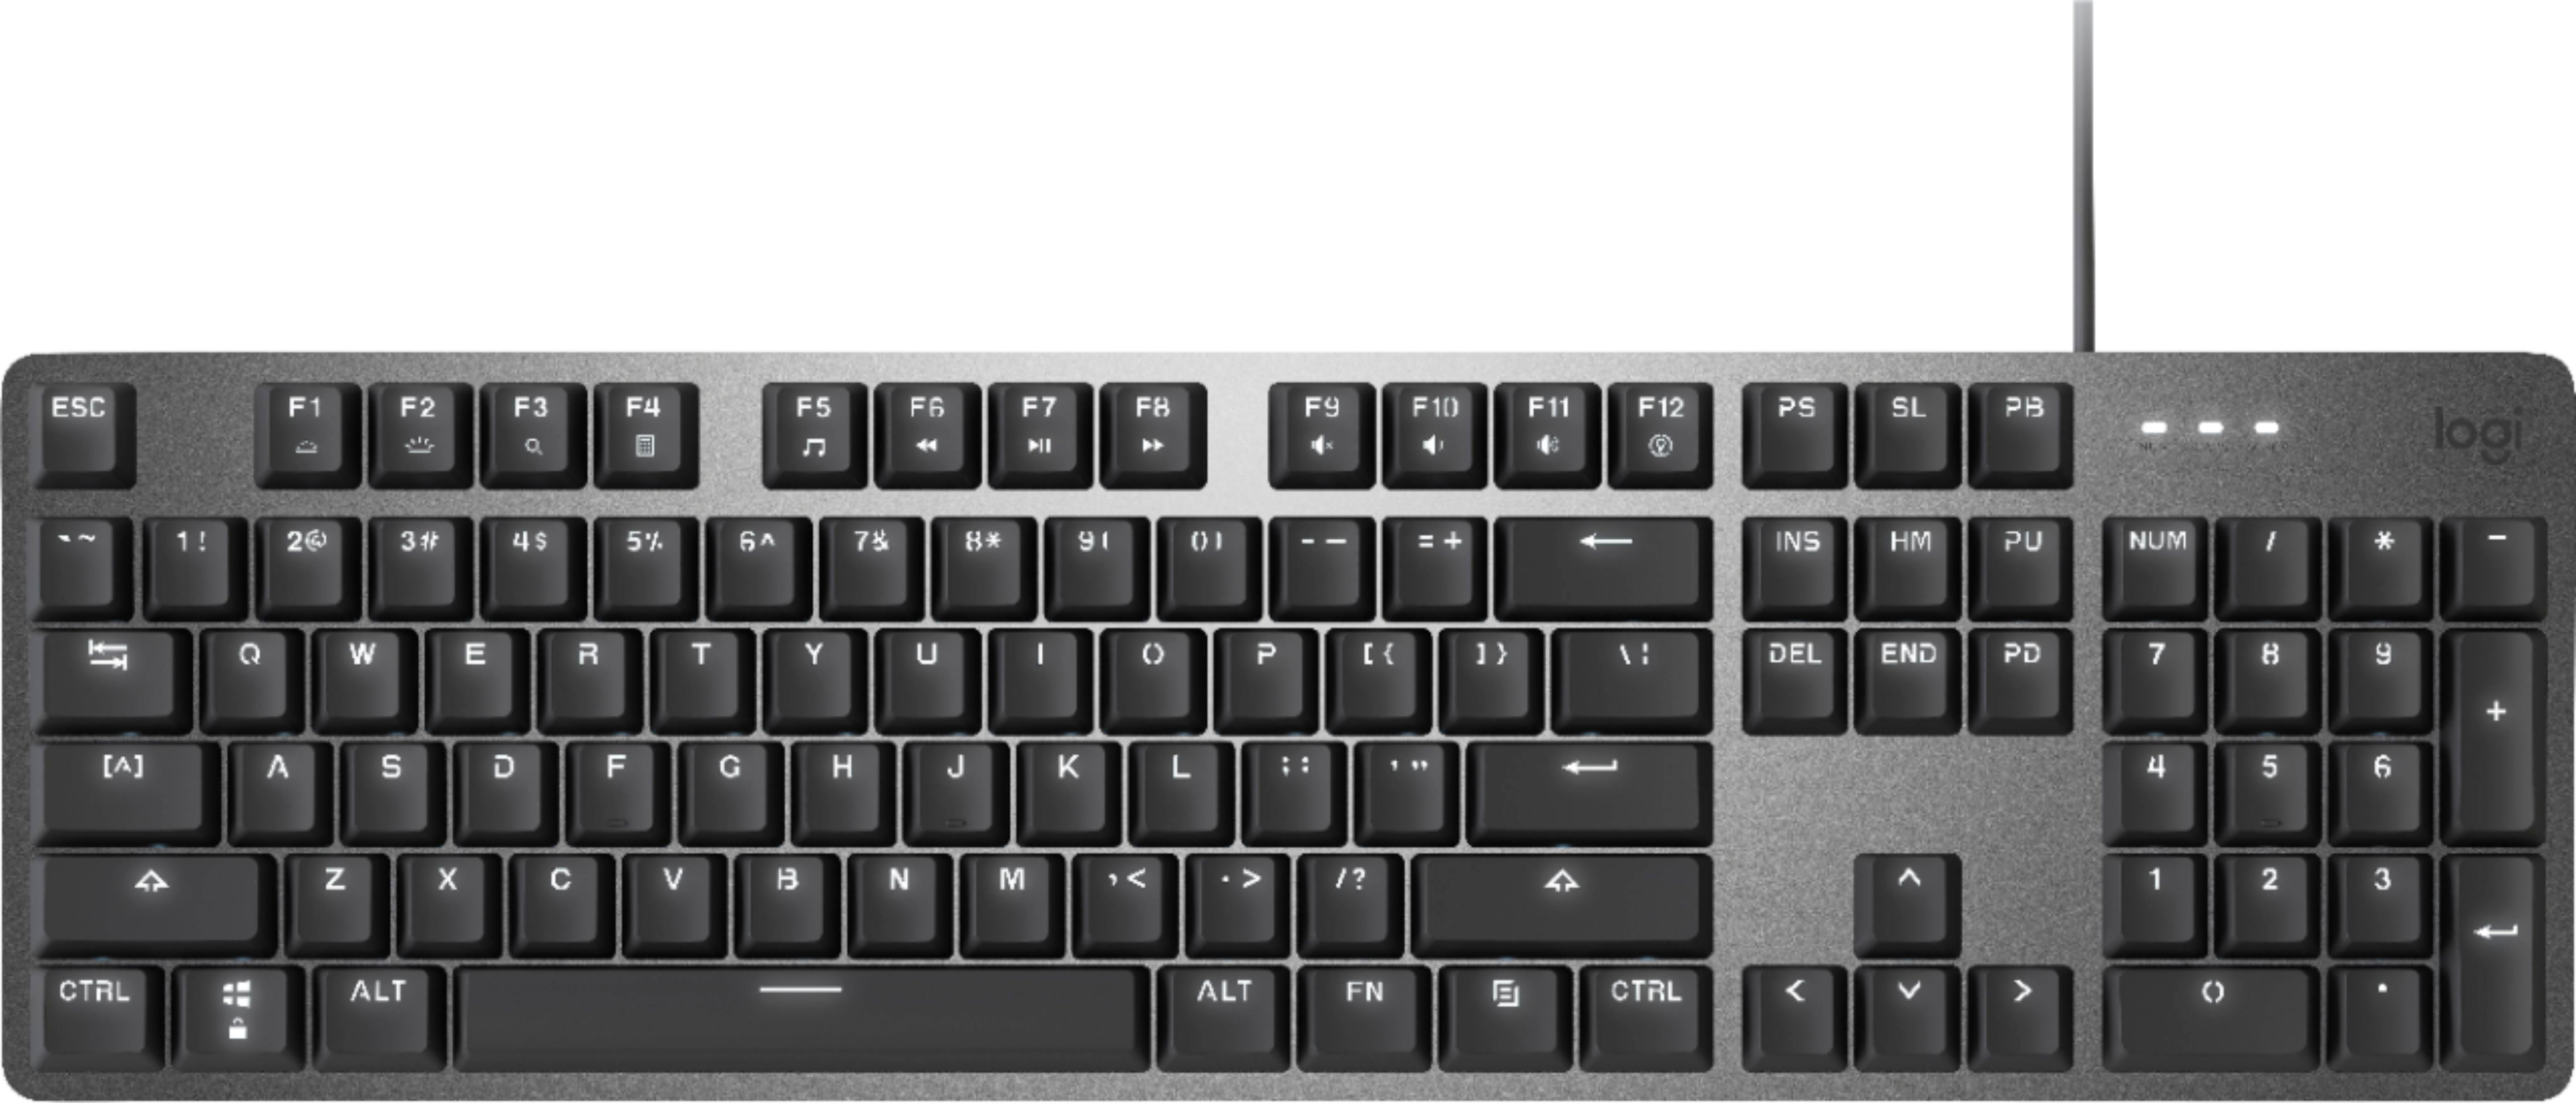 Logitech K845 Full-size Wired Mechanical Cherry MX Linear Switch Keyboard with Five Backlight Modes Graphite 920-009863 Best